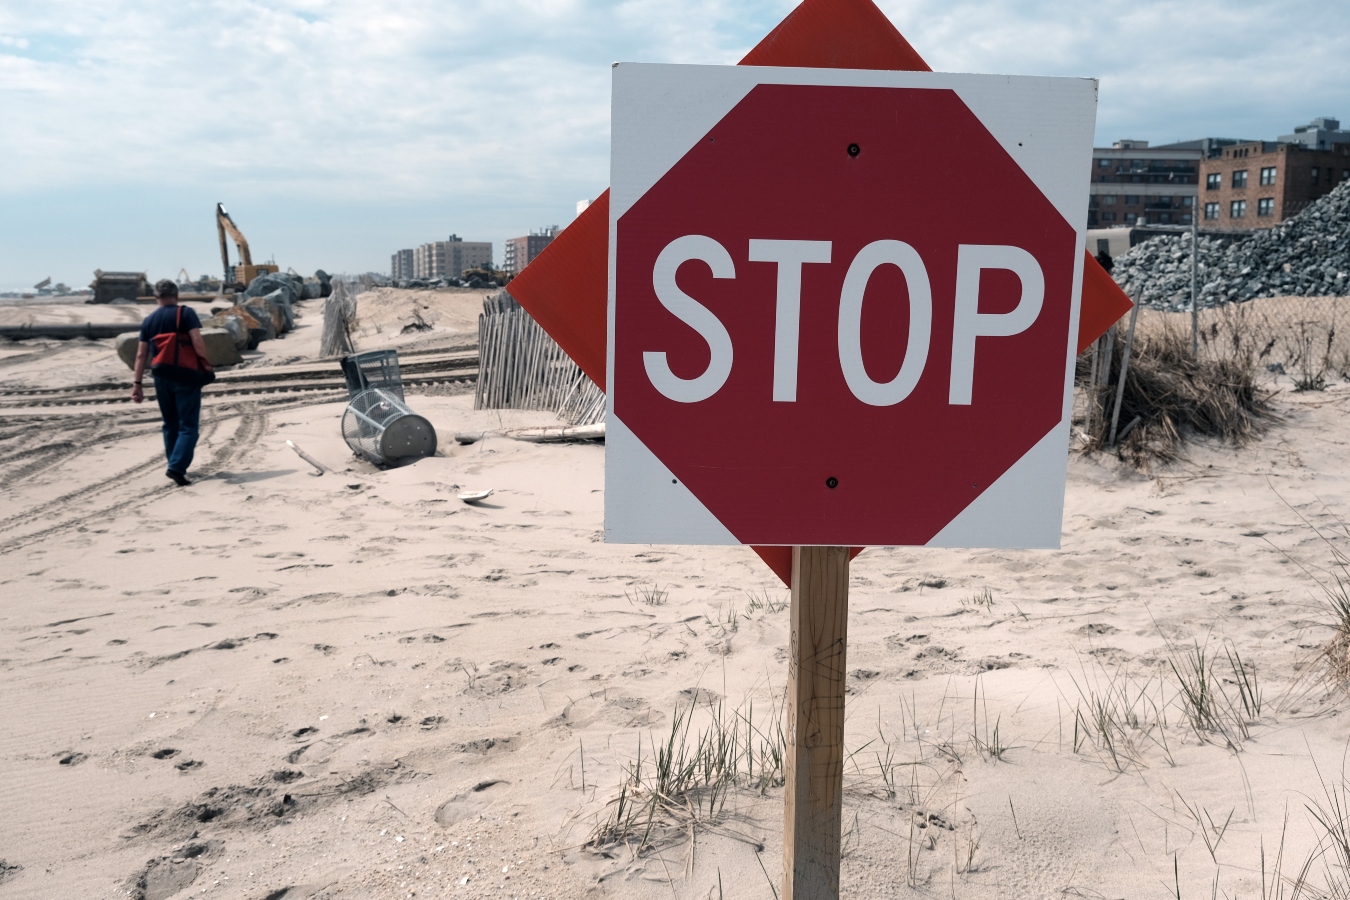 A stop sign is posted on a beach filled with construction equipment.